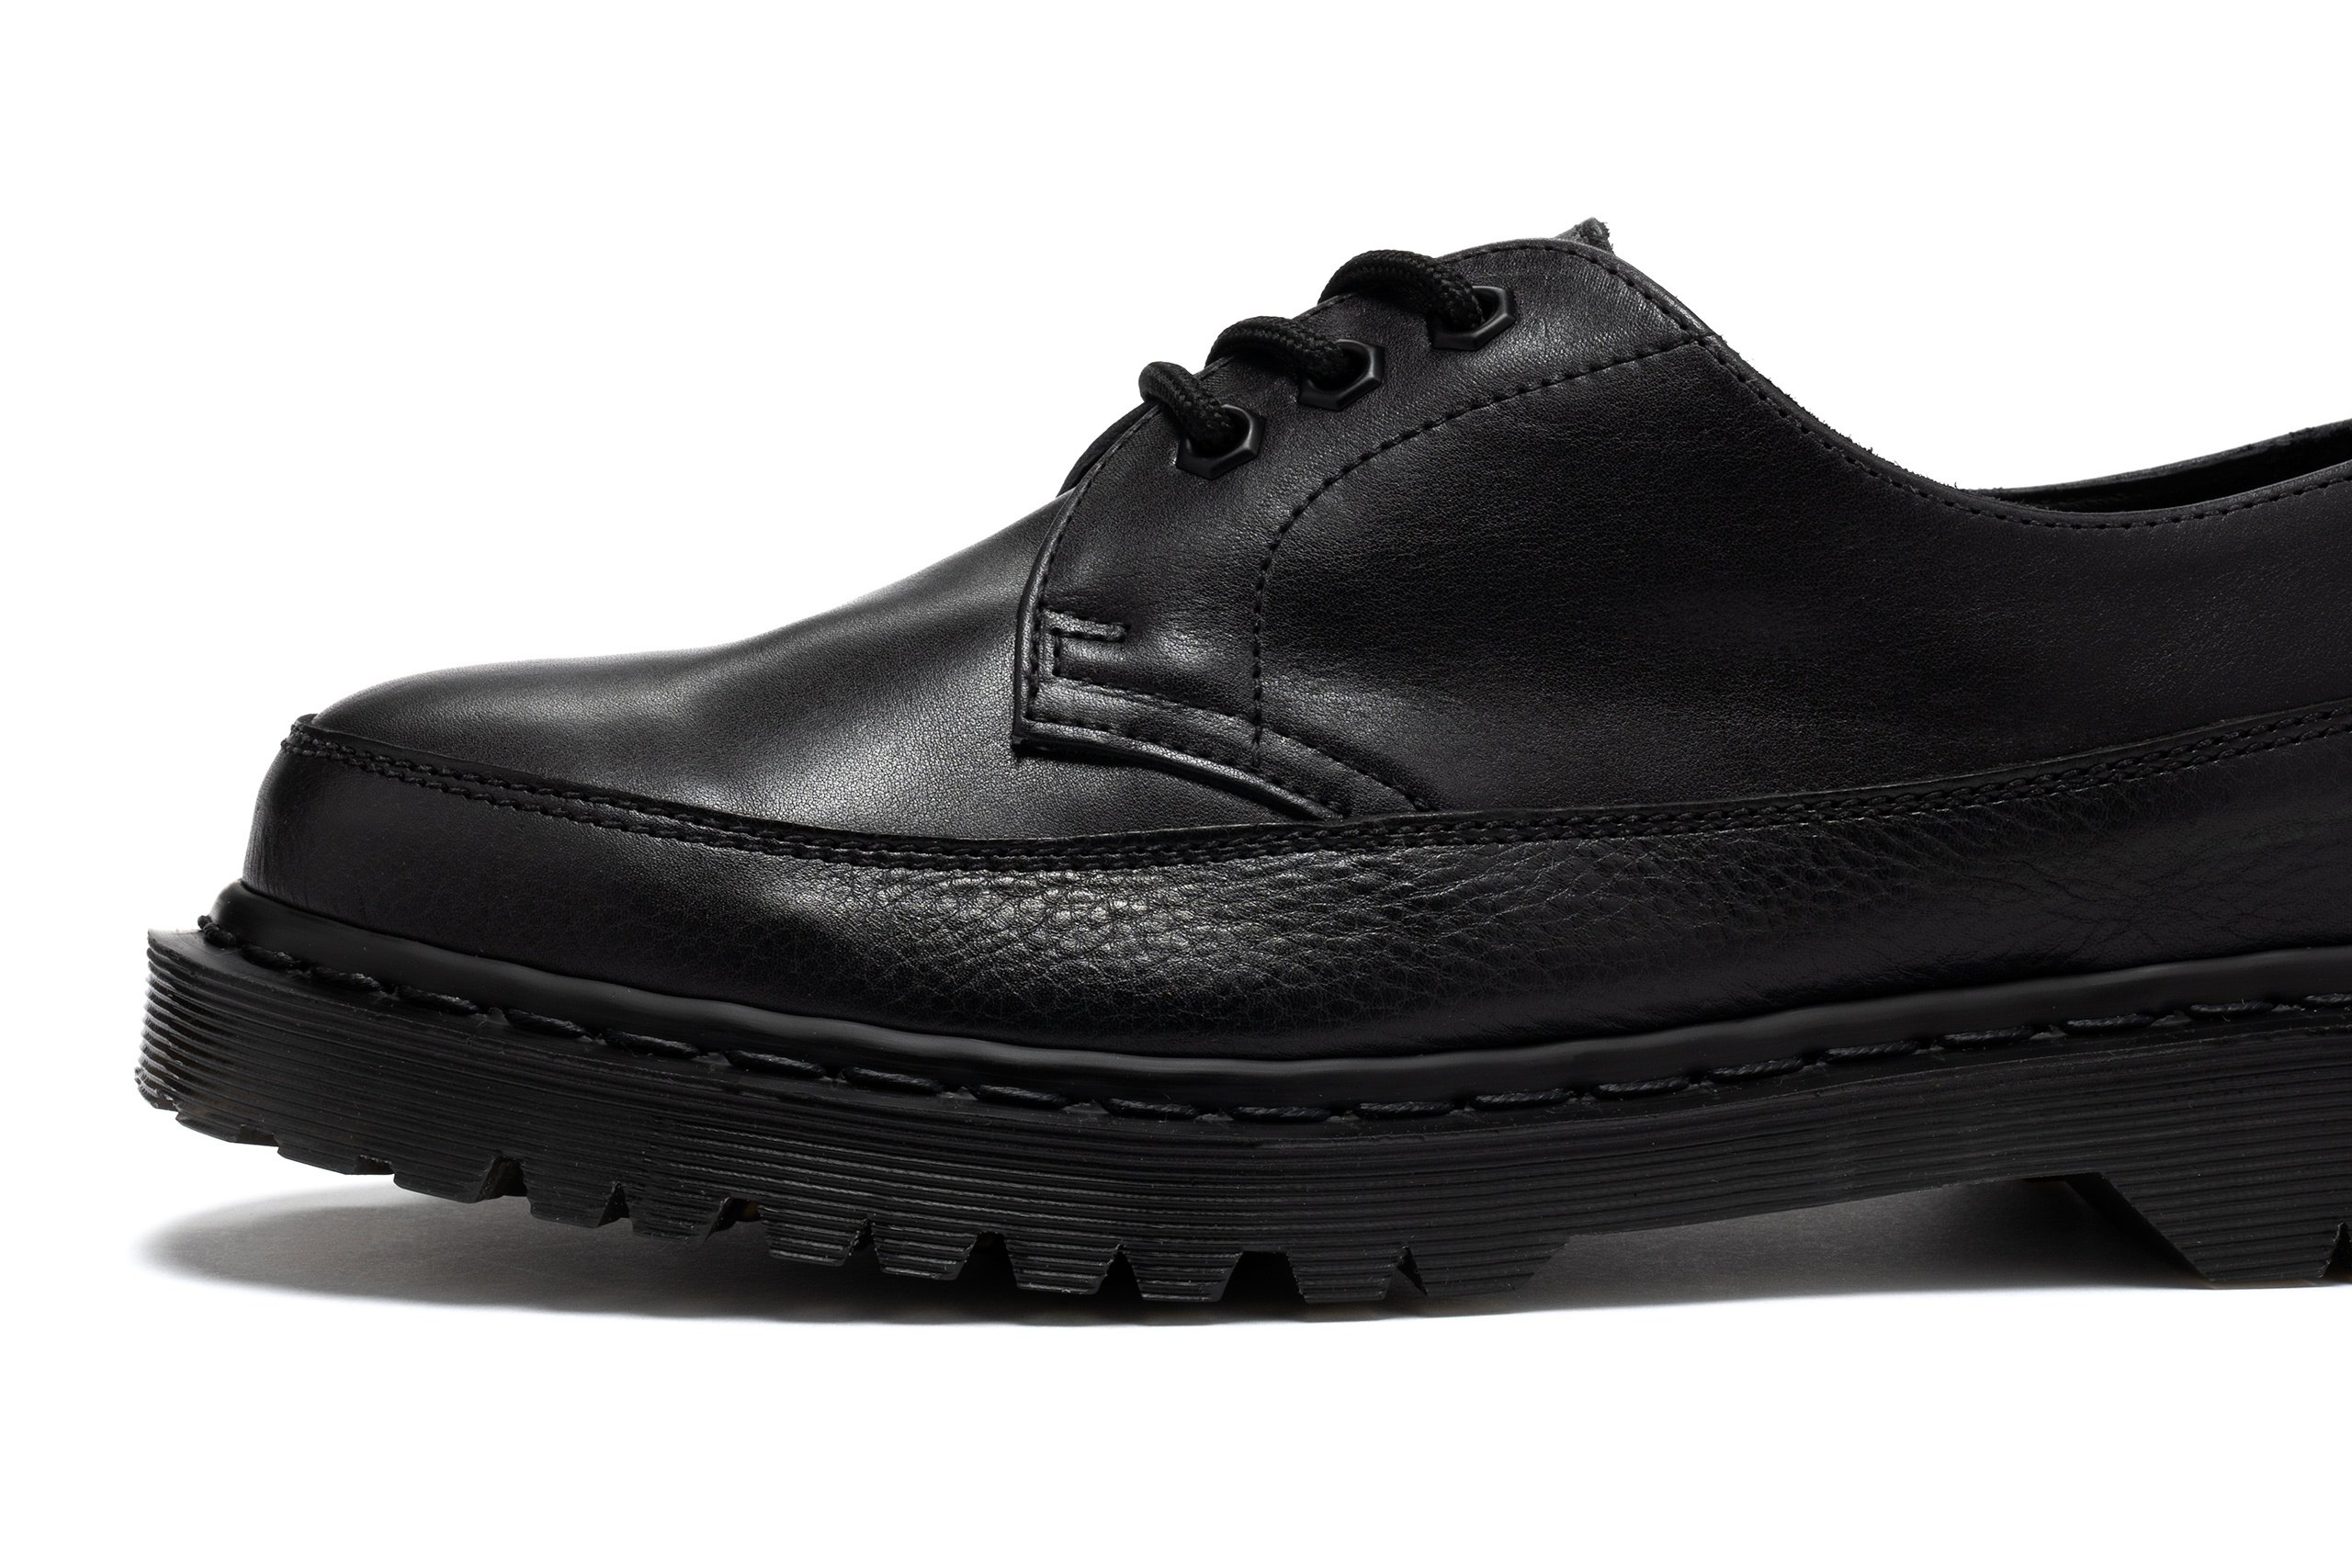 HAVEN / Dr. Martens 1461 | Now Available | HAVEN